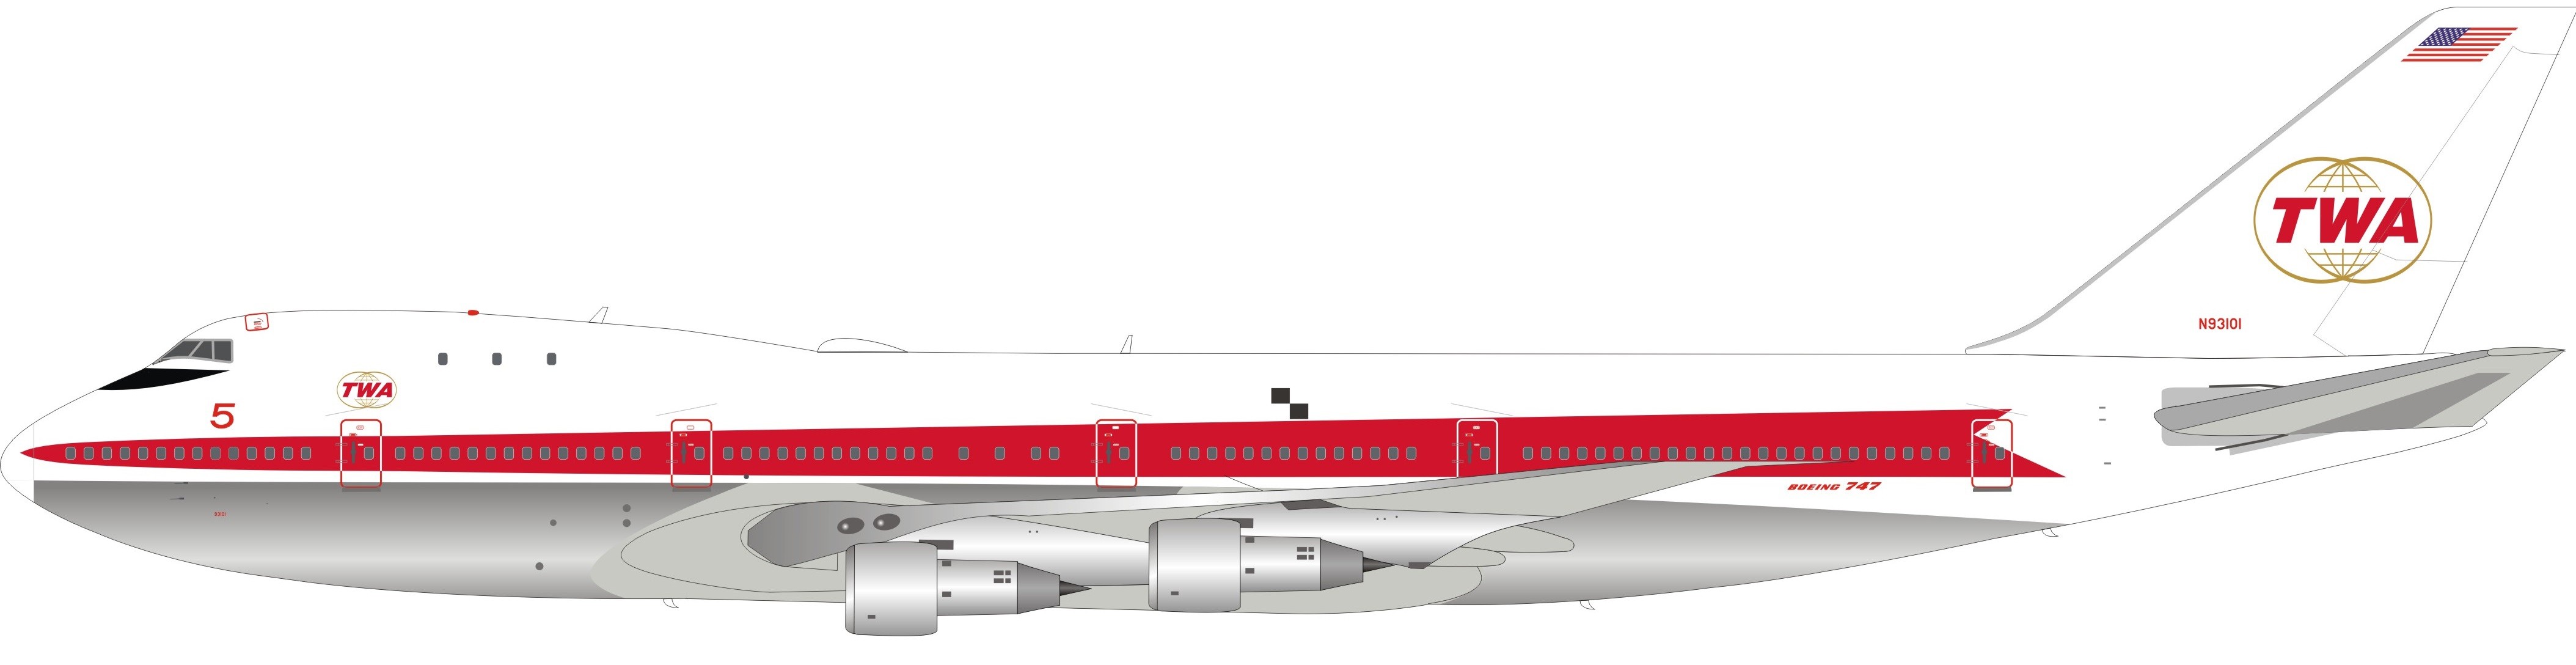  TWA Boeing Outline Trans World Airlines Boeing 747-100 Airplane  Miniature Model N93115 Diecast 1:200 Part# A012-IF741010 : Arts, Crafts &  Sewing